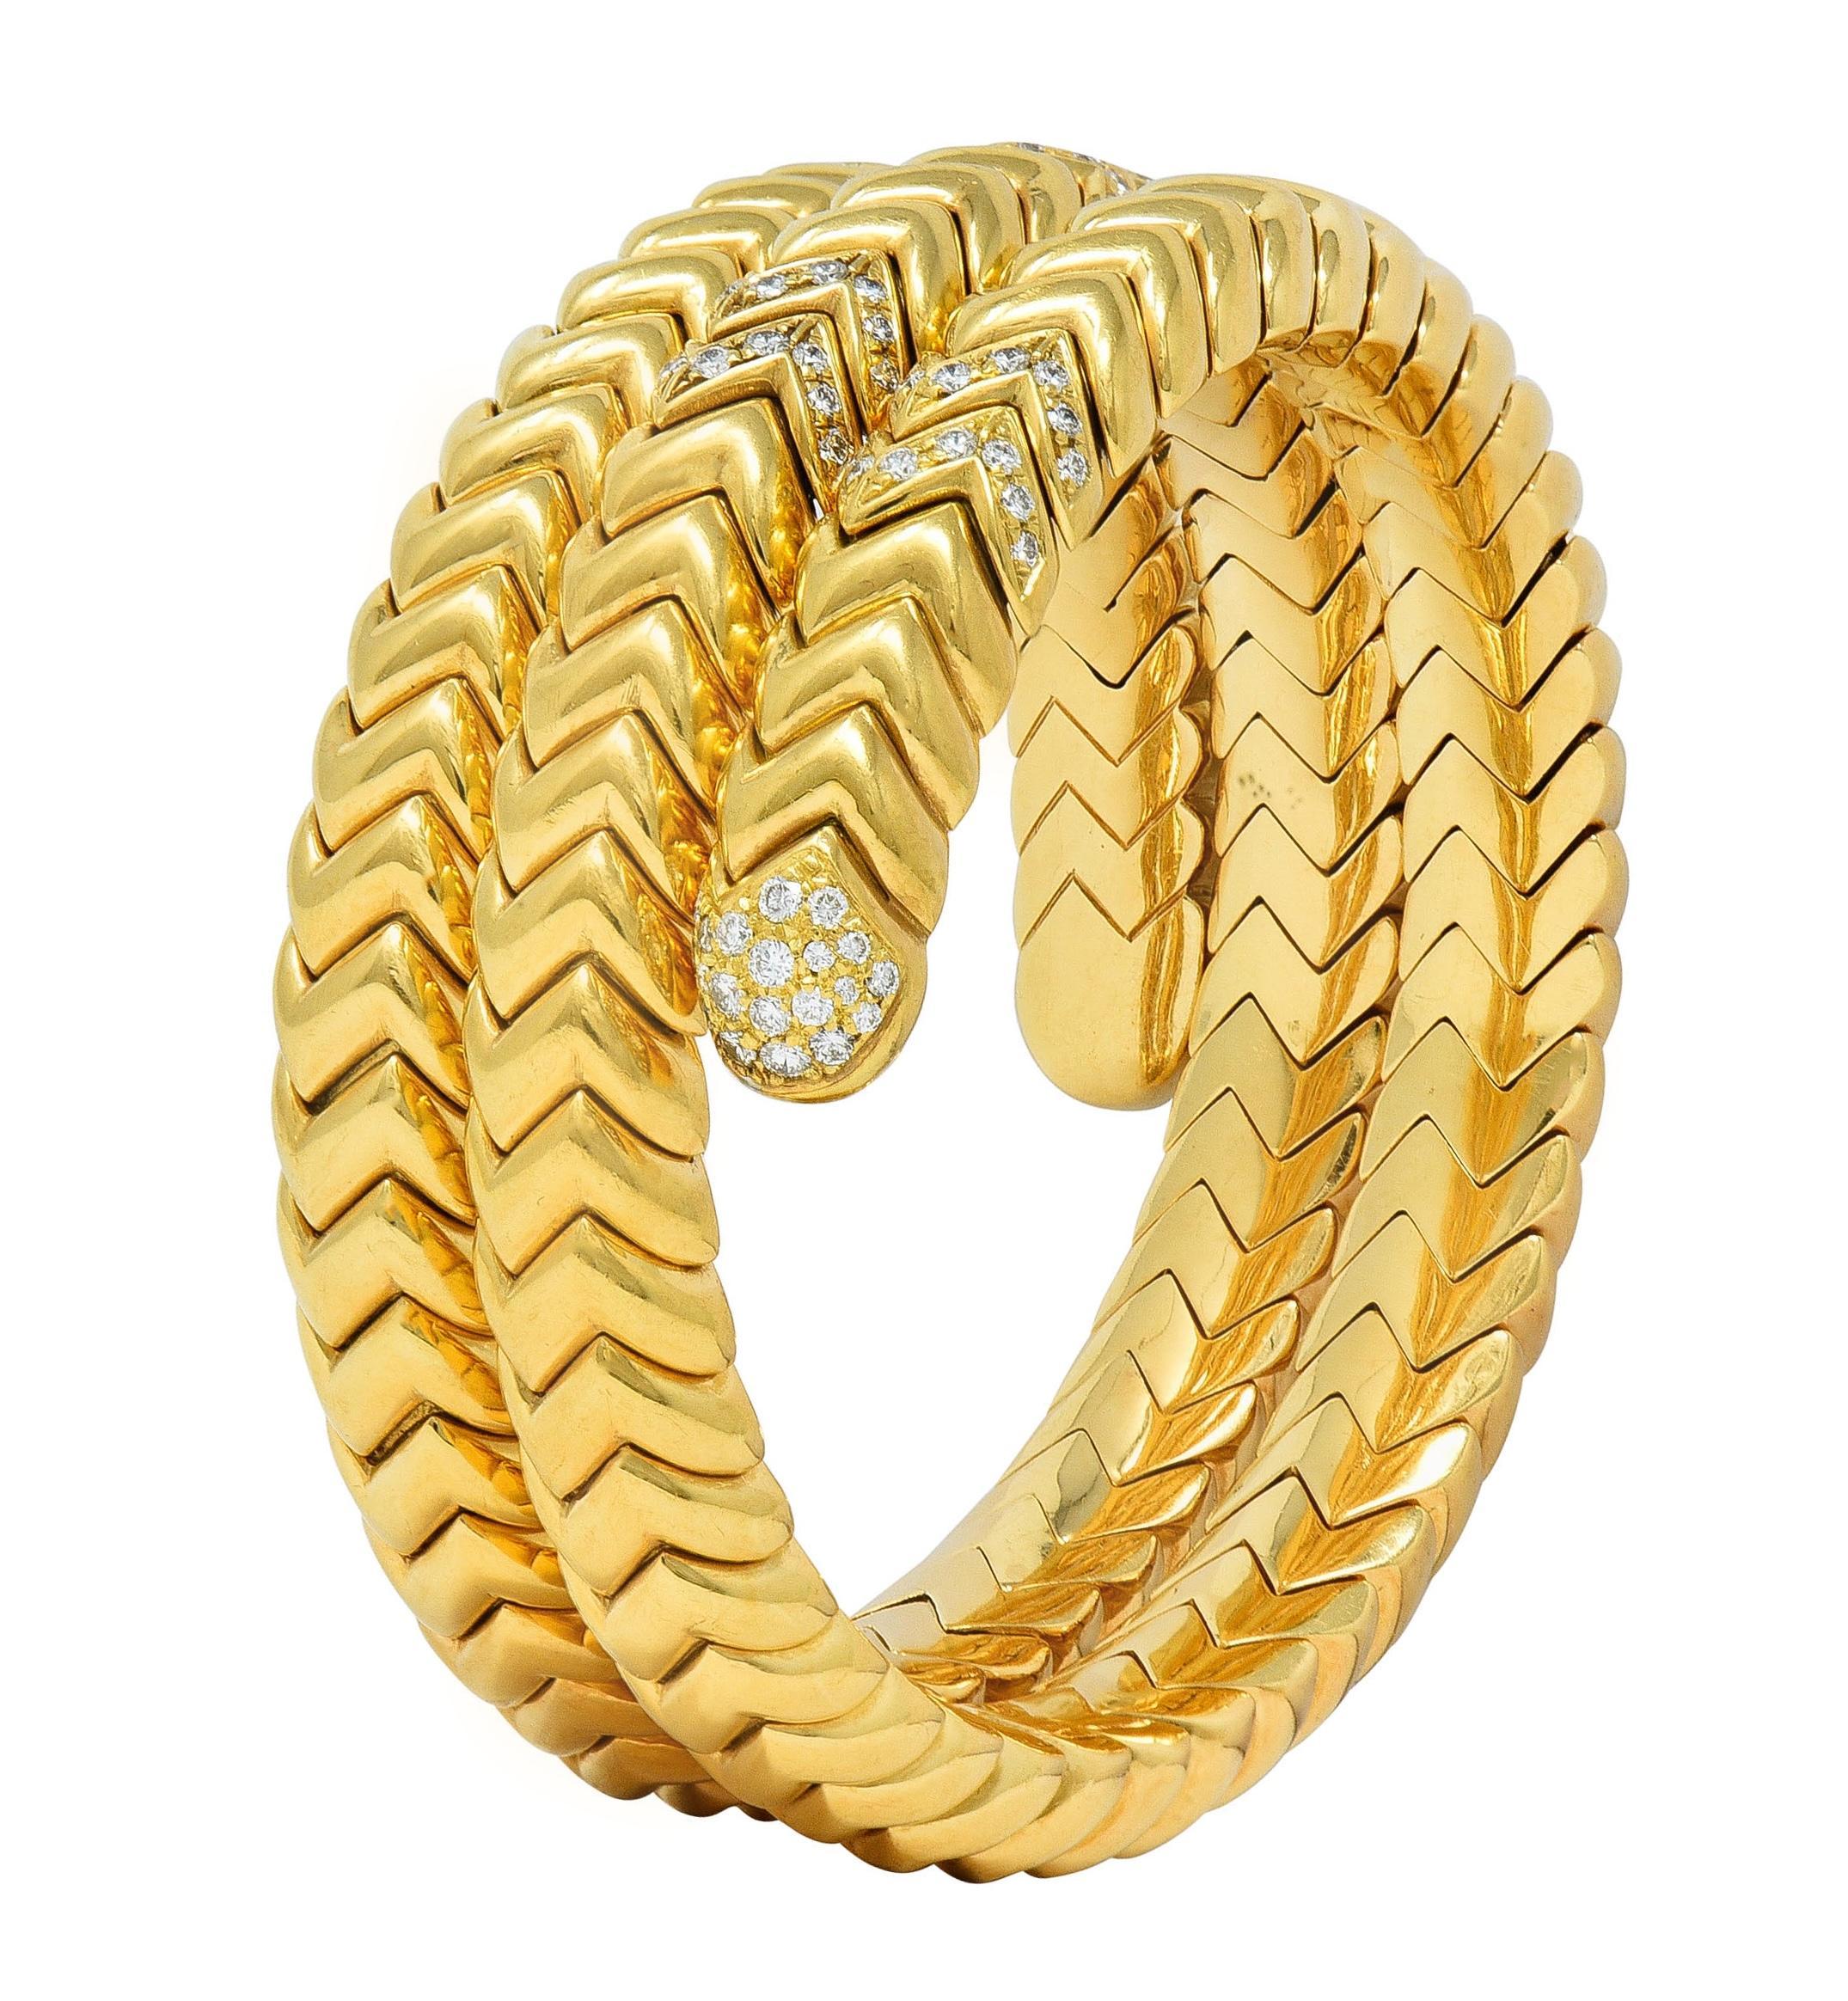 Designed as a flexible tubogas style wrap bracelet comprised of 'Spiga' motif zigzag segments
Featuring rounded terminals with round brilliant cut diamonds in pavéd segments
Weighing approximately 2.50 carats total - F/G color with VS